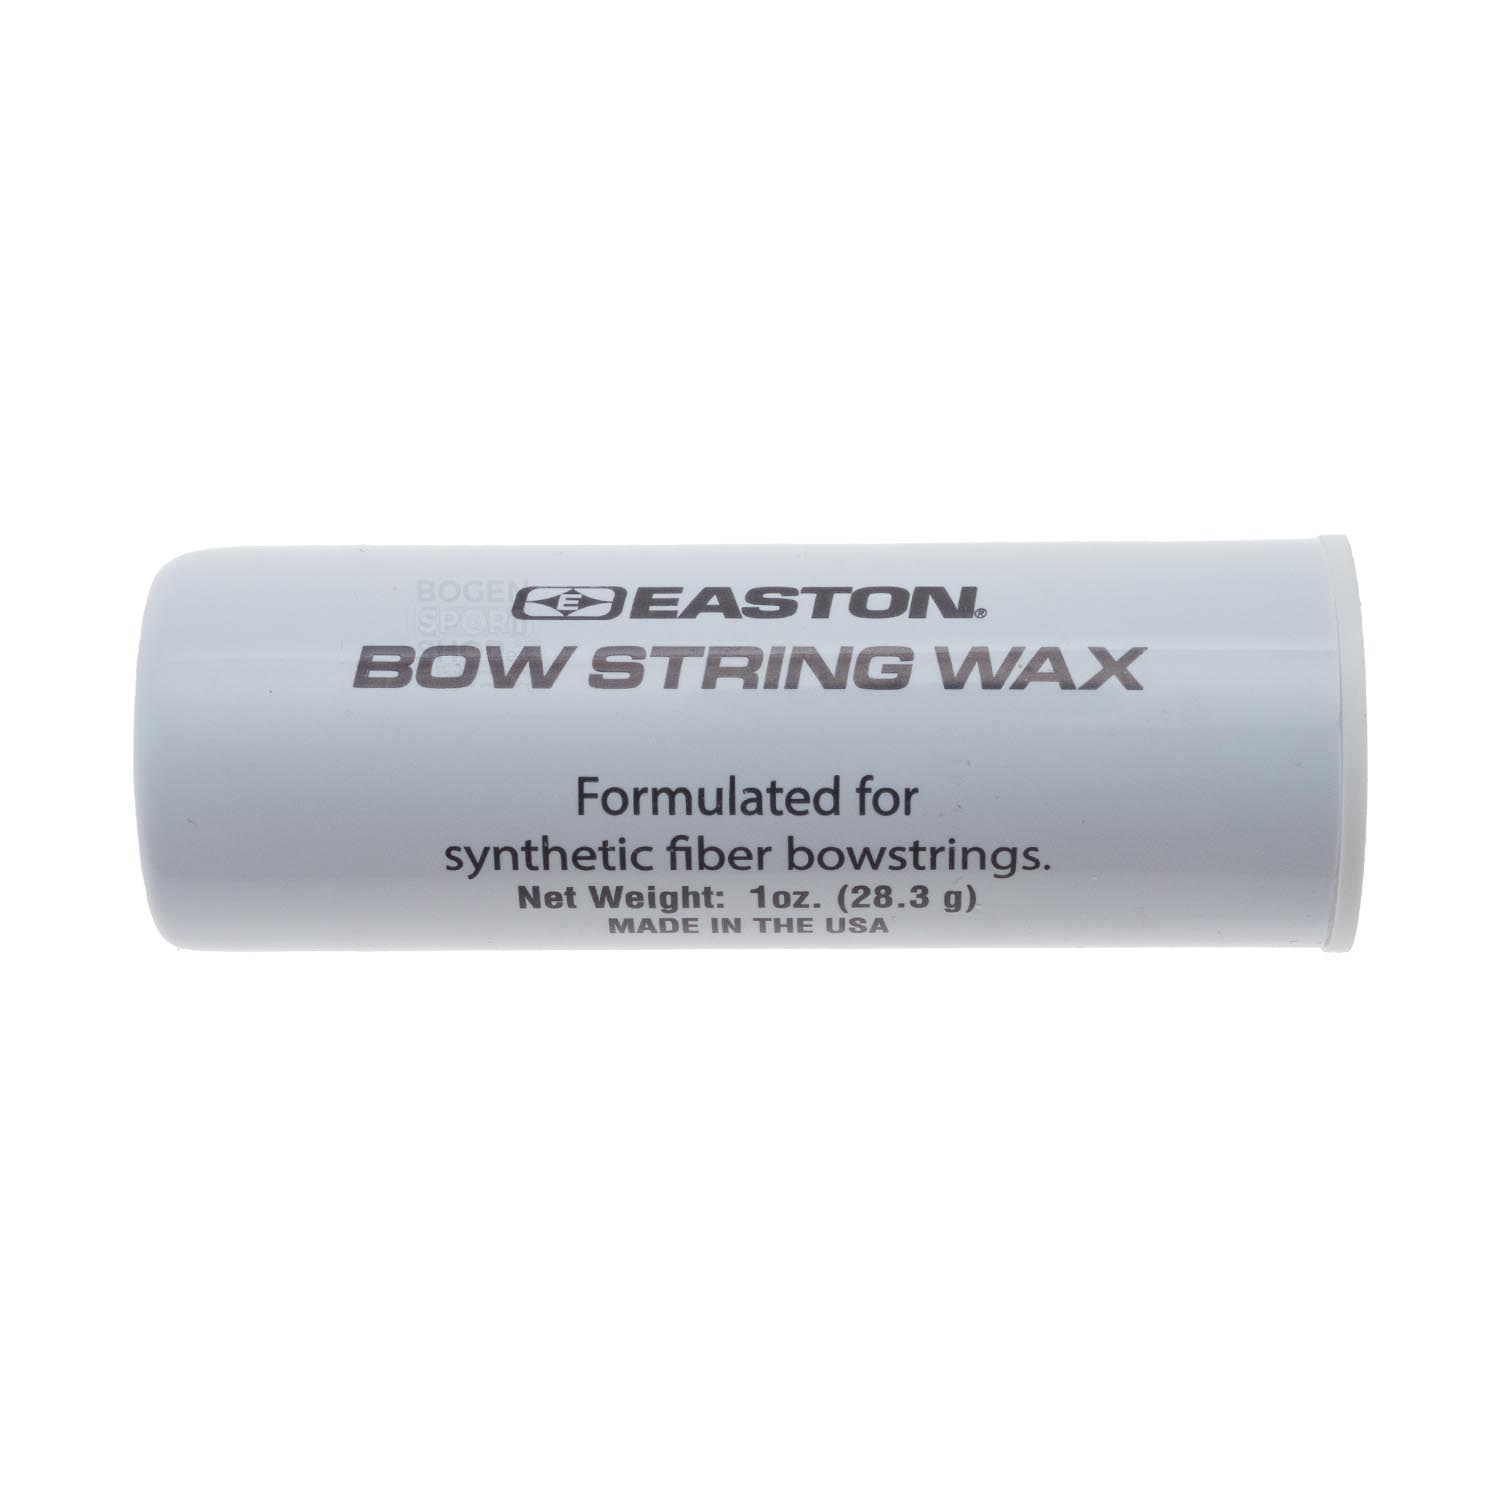  Buy Easton Bow String Wax online